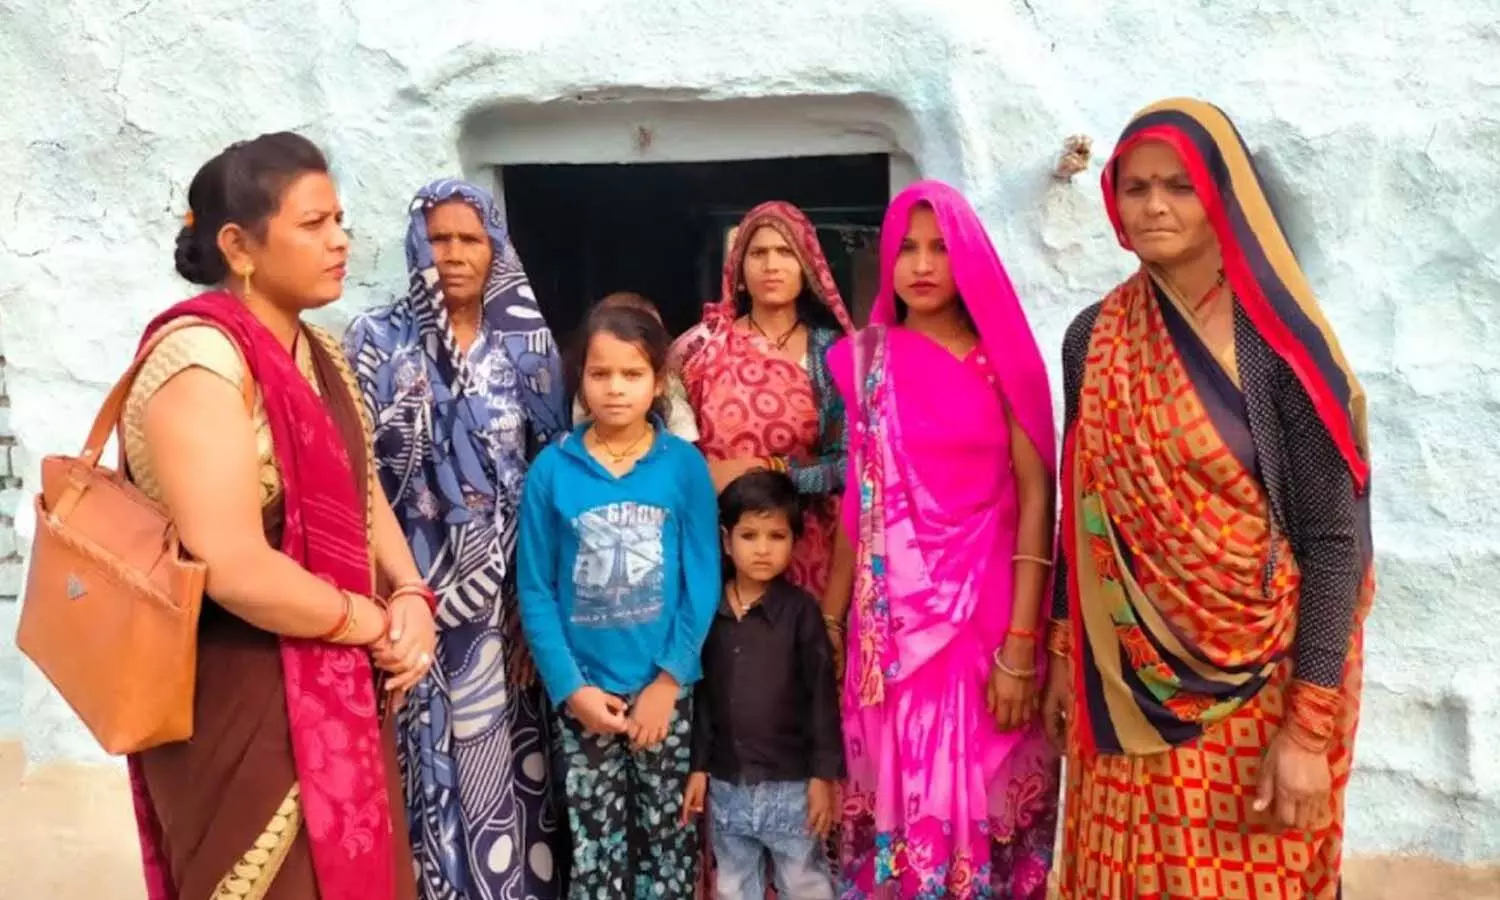 Mother-in-law in the village teaches family planning lessons to daughter-in-law